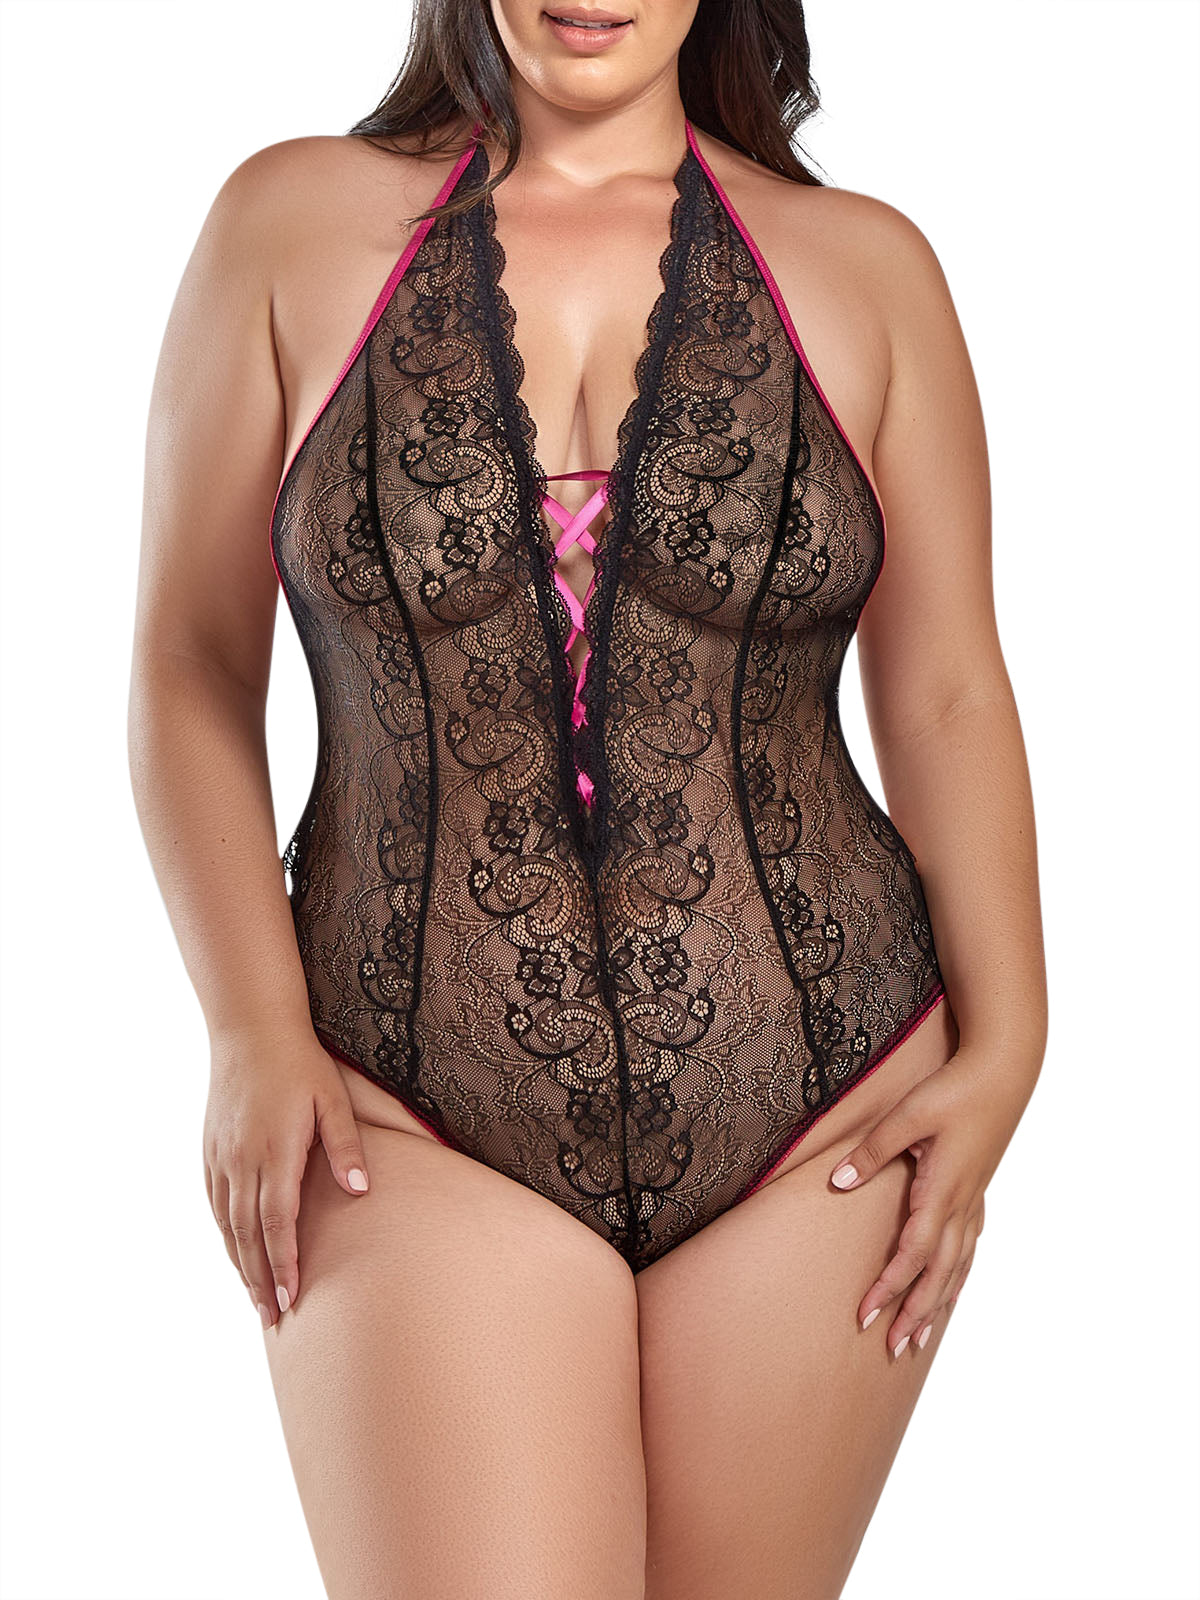 iCollection Teddy Women's Moonlit Nights Plus Size Teddy Lingerie